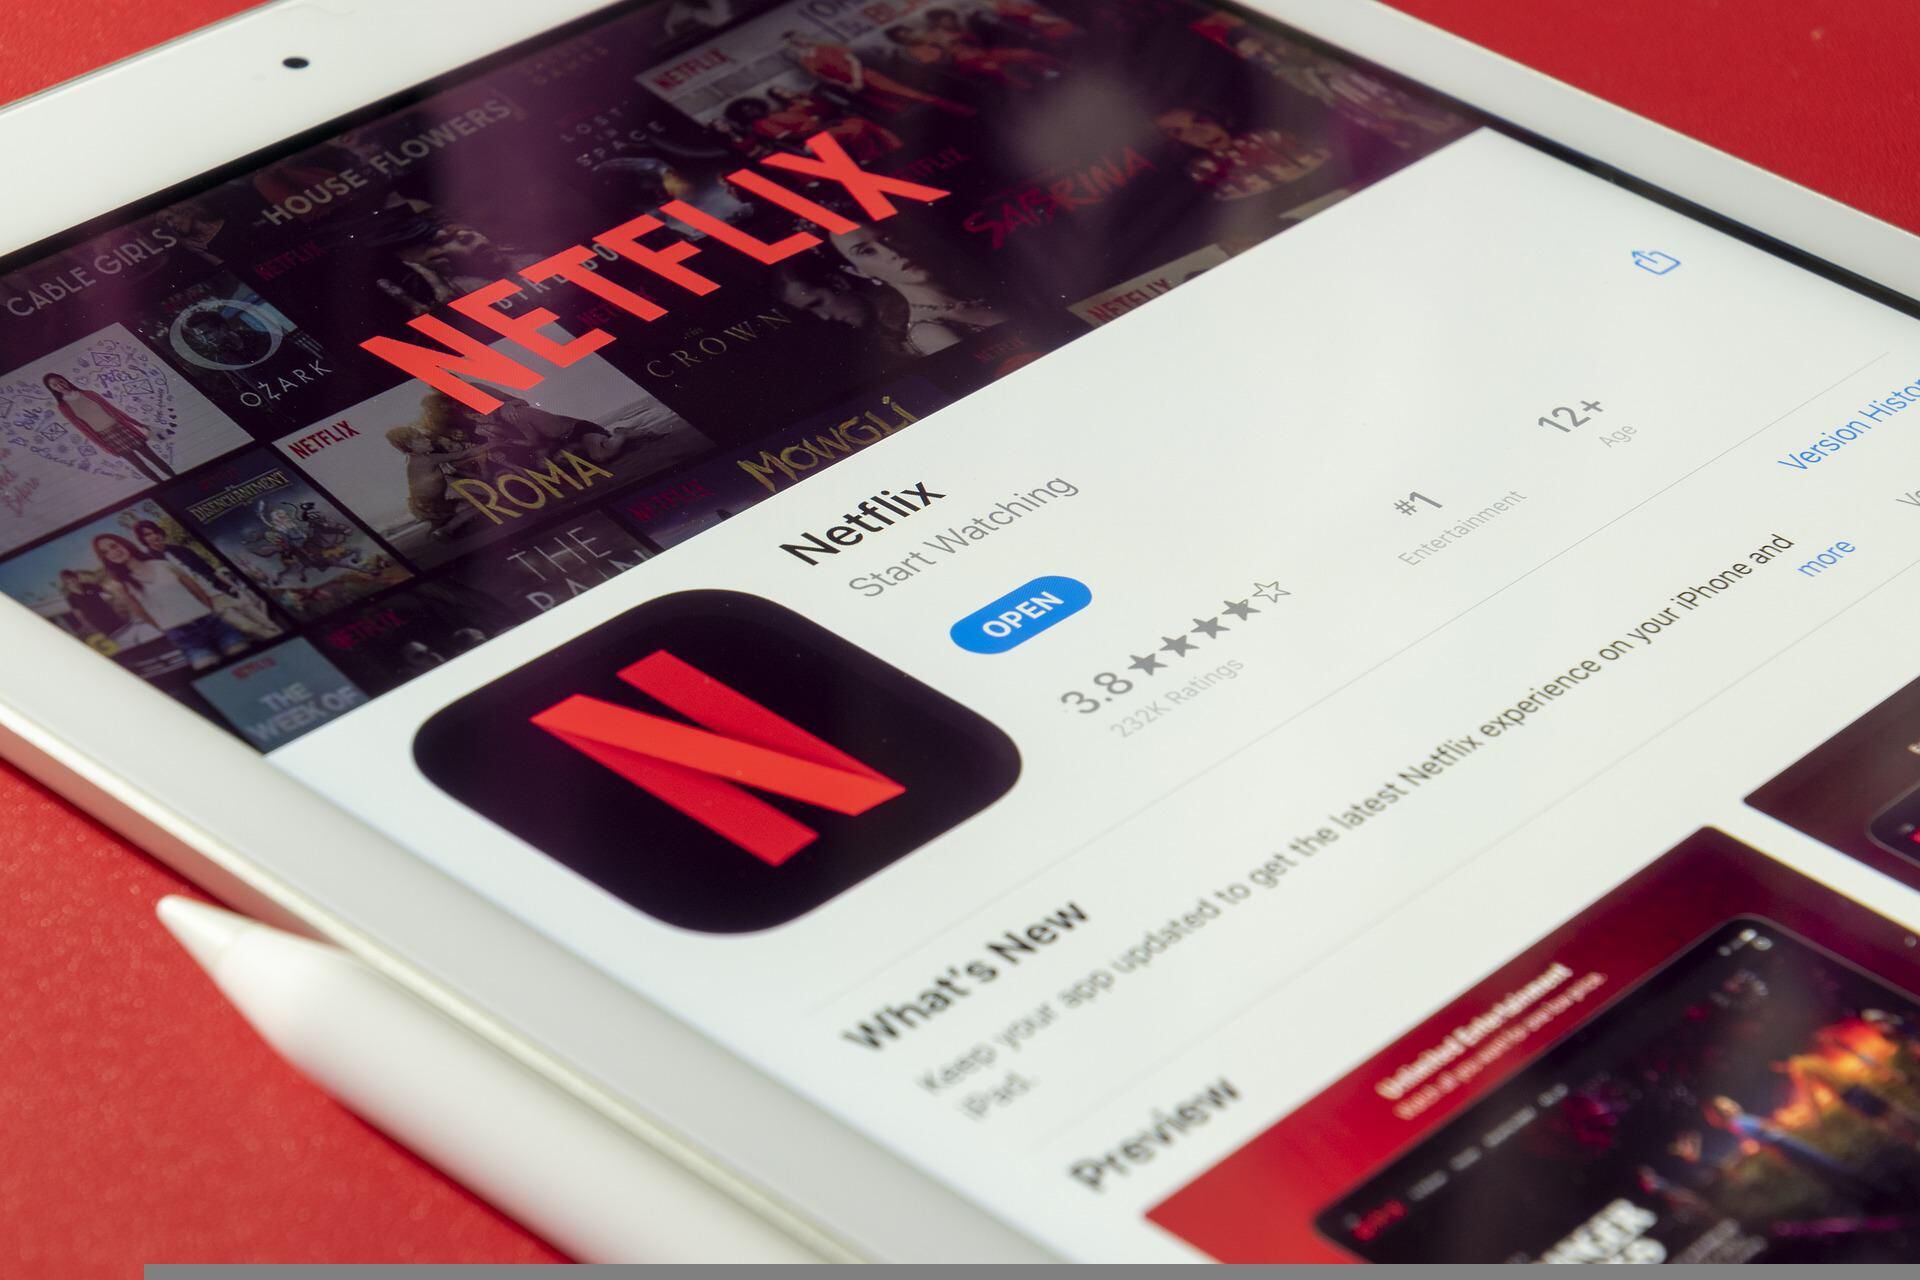 Netflix currently has three plans.